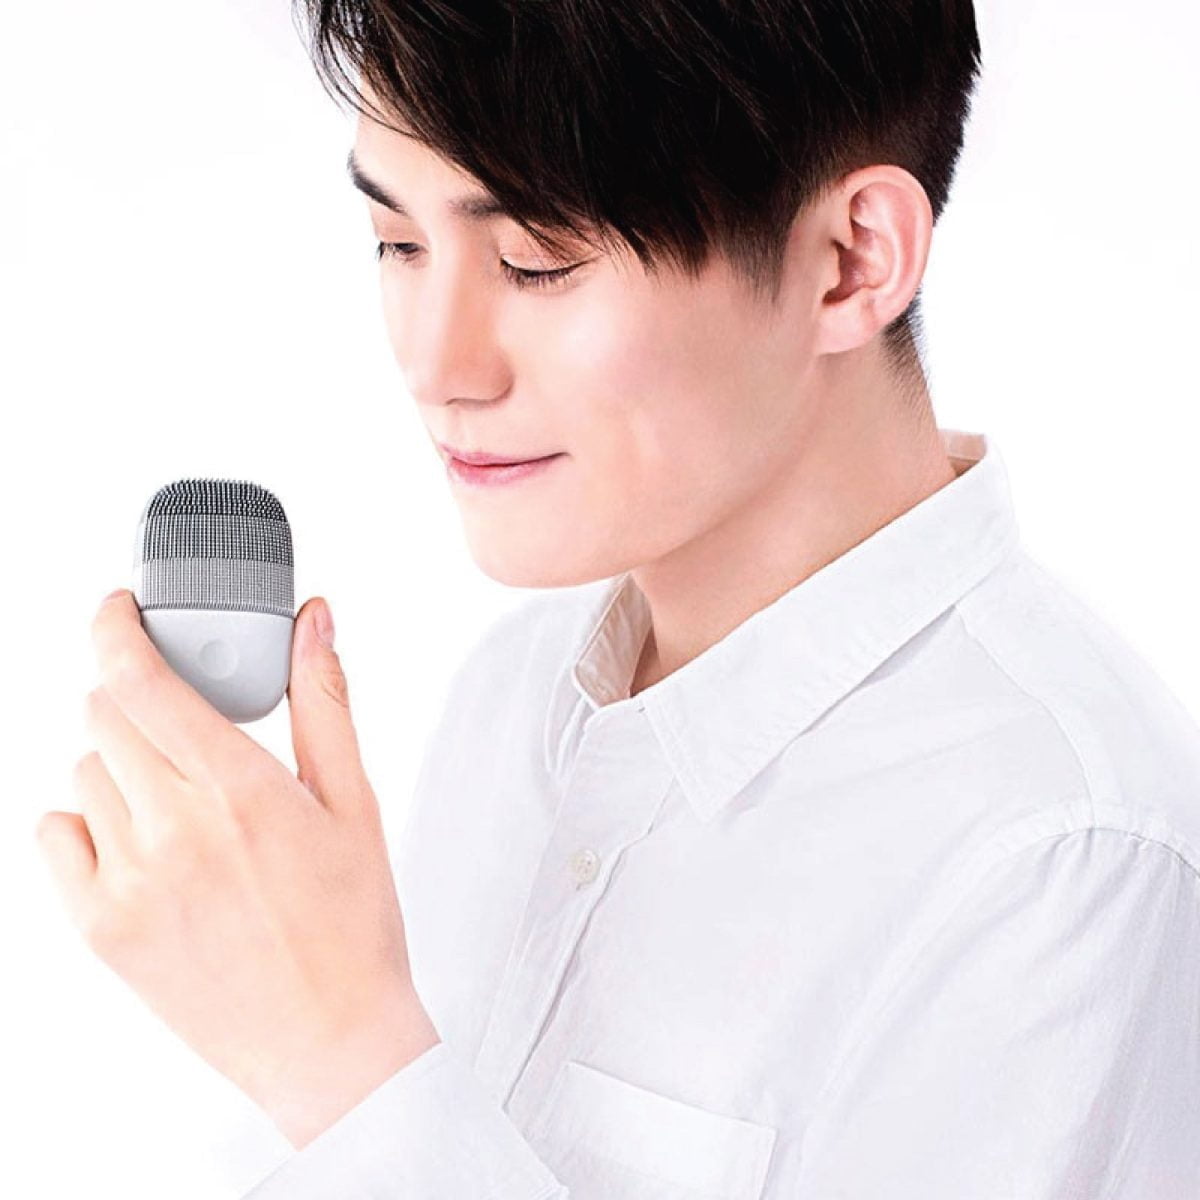 Wtf3 01 Xiaomi &Lt;Strong&Gt;Deep Cleansing Of The Face - 3-Speed Modes - 3 Cleansing Areas - Made Of Hypoallergenic Silicone - Long Battery Life - Default 90S Cleaning&Lt;/Strong&Gt; Xiaomi Mijia Inface Smart Face Cleaner - Orange (2019 Design Award) Xiaomi Mijia Inface Smart Face Cleaner - Orange (2019 Design Award)